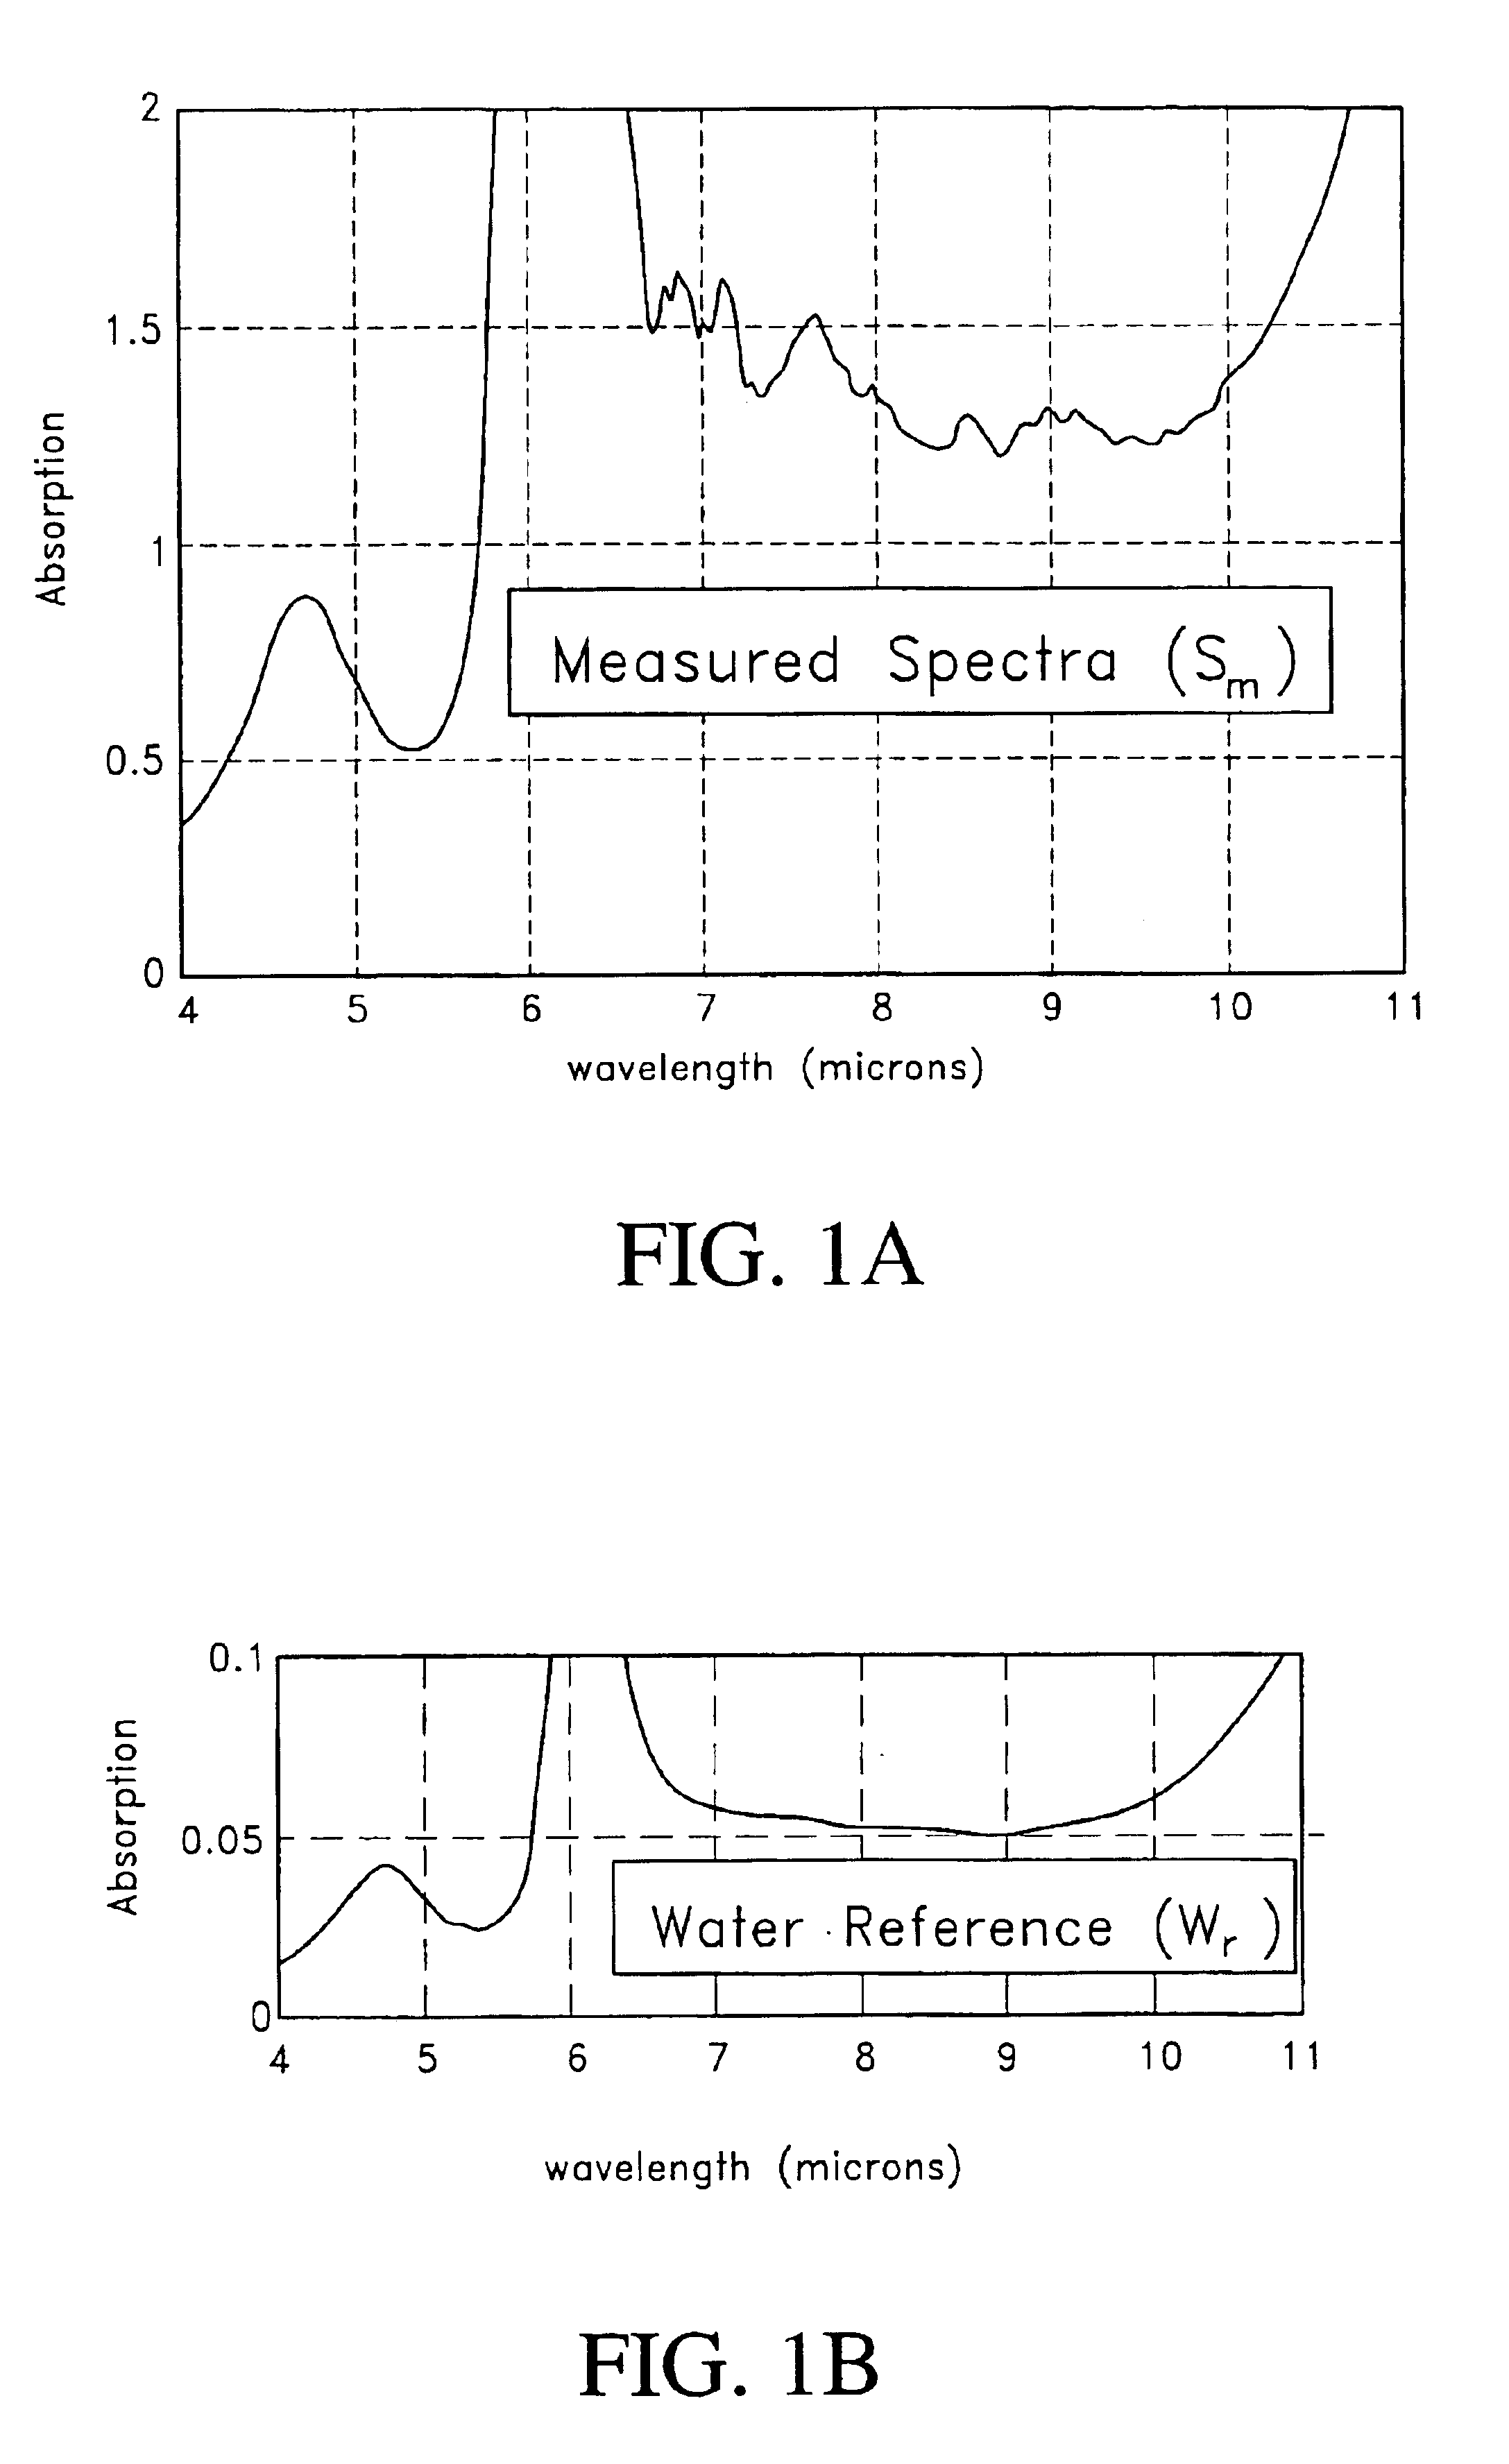 Method of determining an analyte concentration in a sample from an absorption spectrum